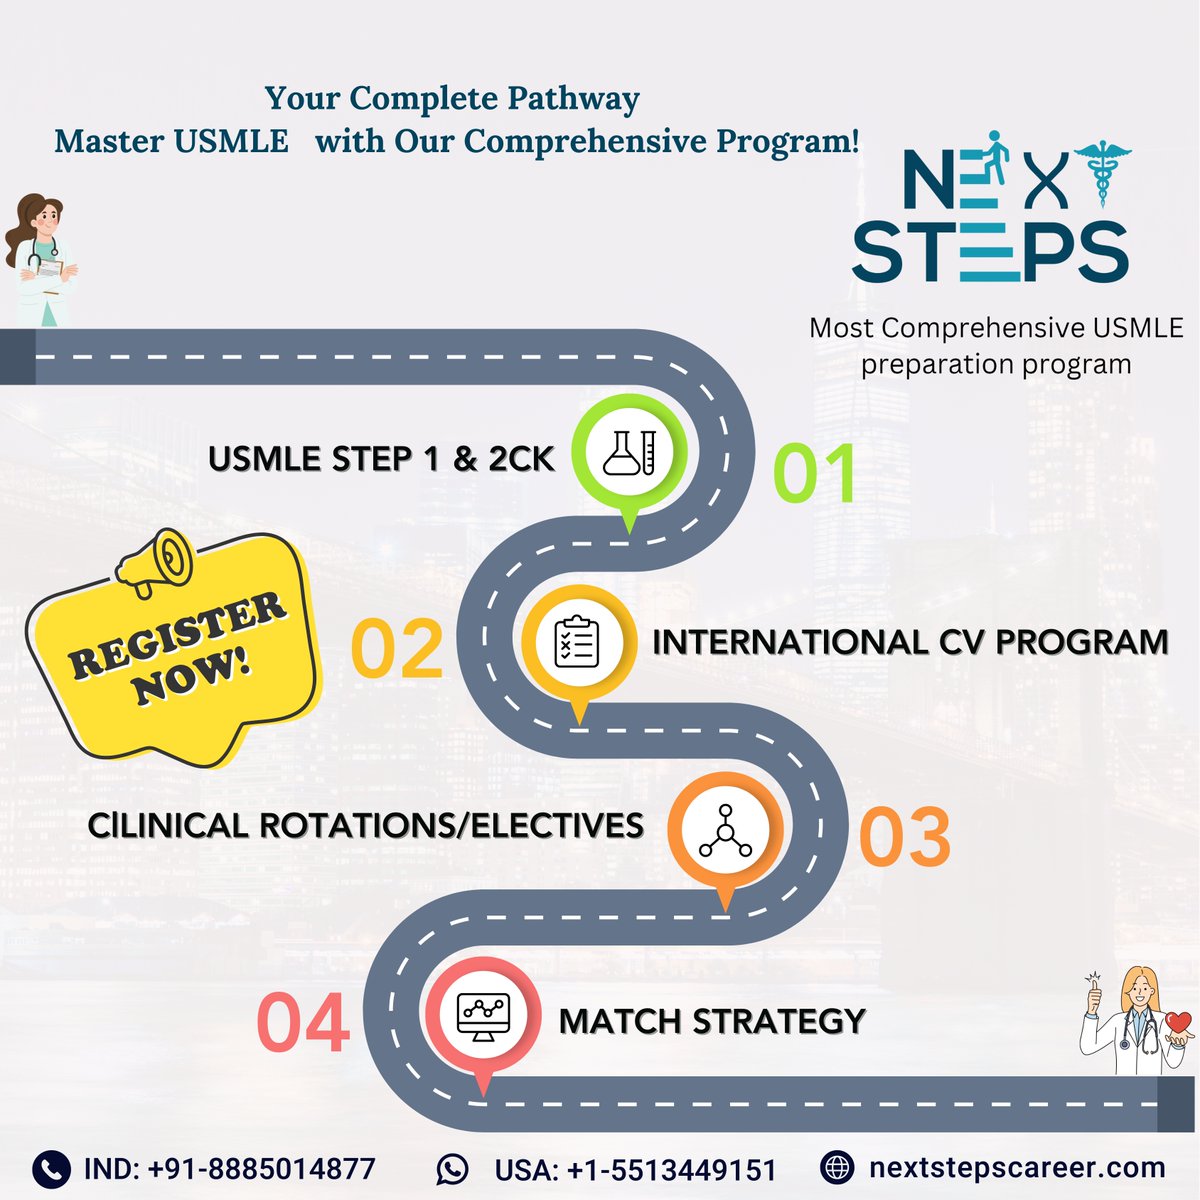 Ready to master the USMLE and unlock your pathway to success? 🚀 
Enroll Now: nextstepscareer.com/enroll-now/

#usmle #clinicalrotations #inpatient #Residency #residencymatch #usmlematch #usmlepreparation #nextsteps #nextstepsusmle